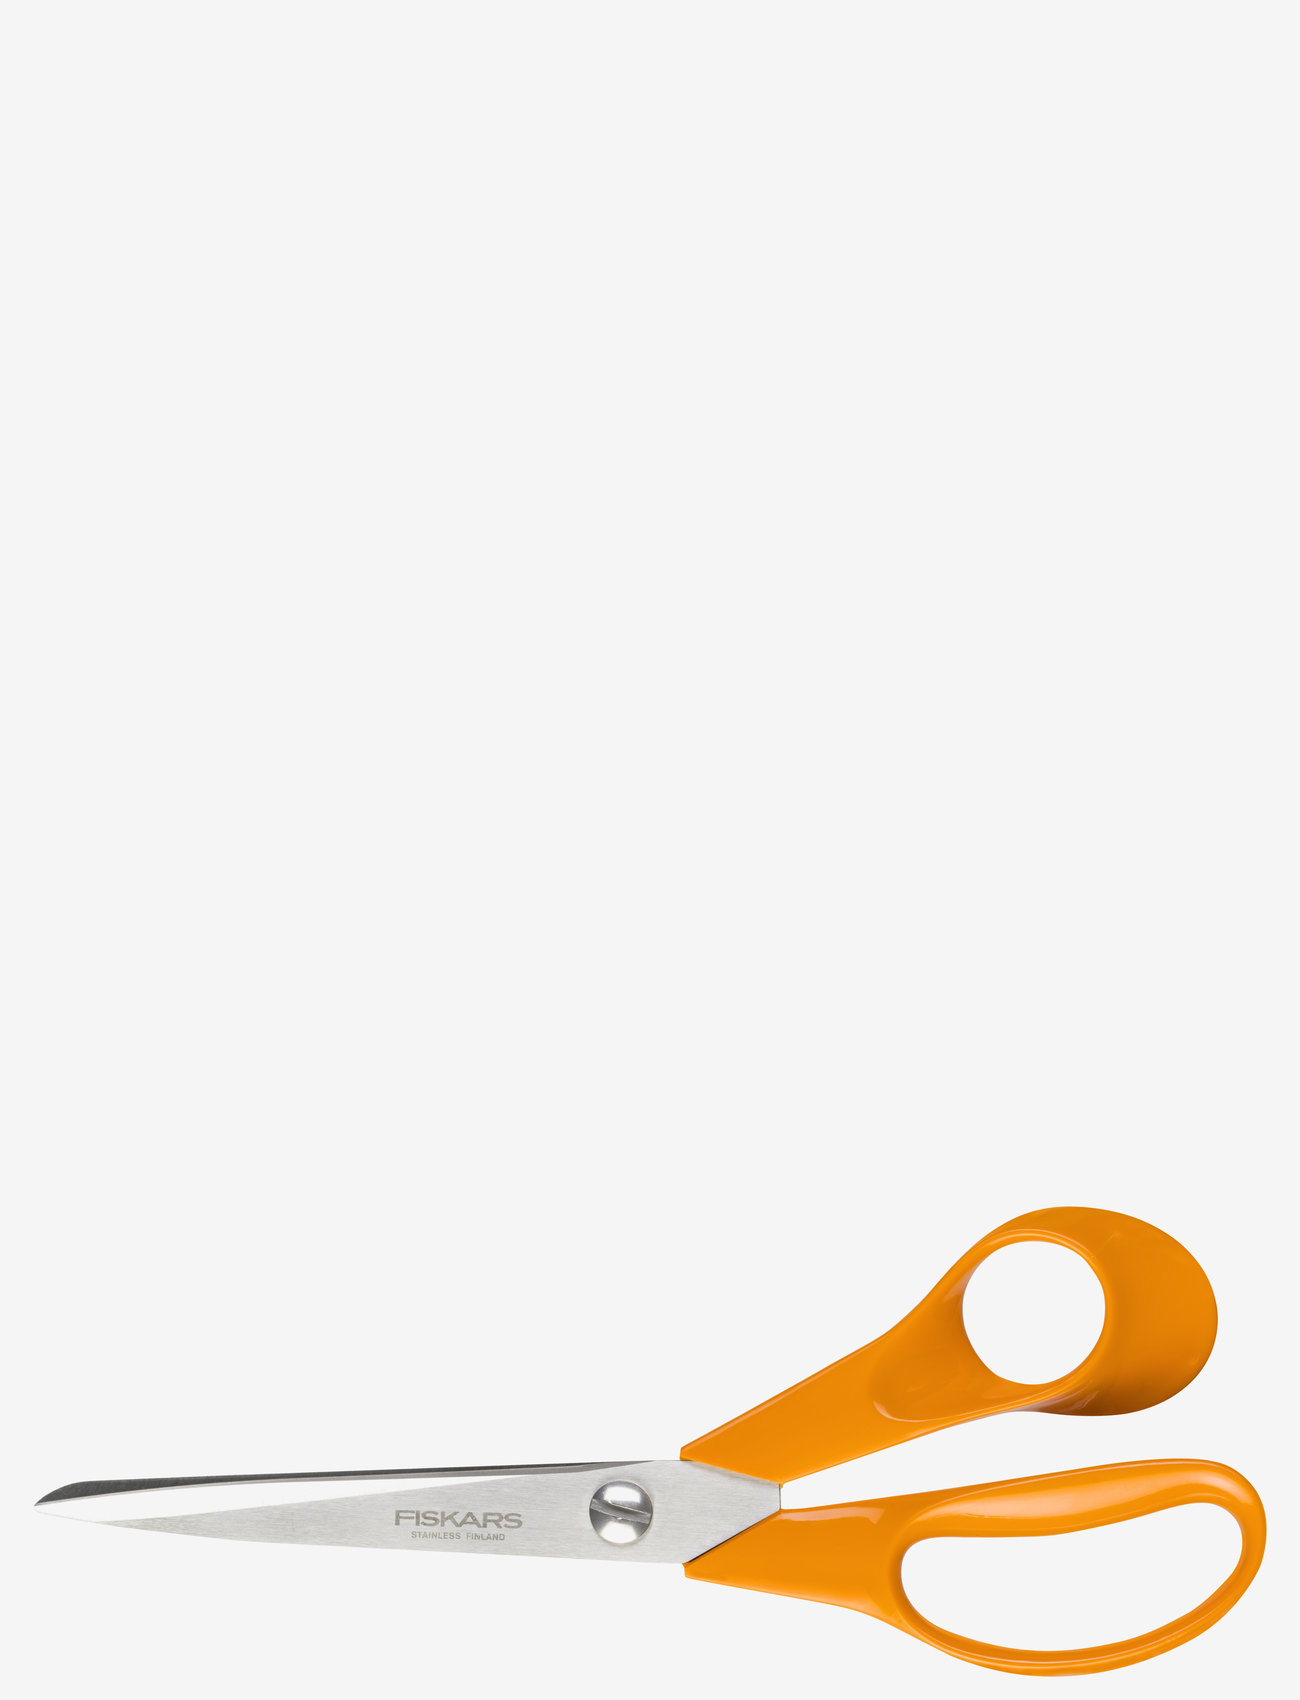 Stainless Steel Finland. Fiscars Poultry Shear Scissors 